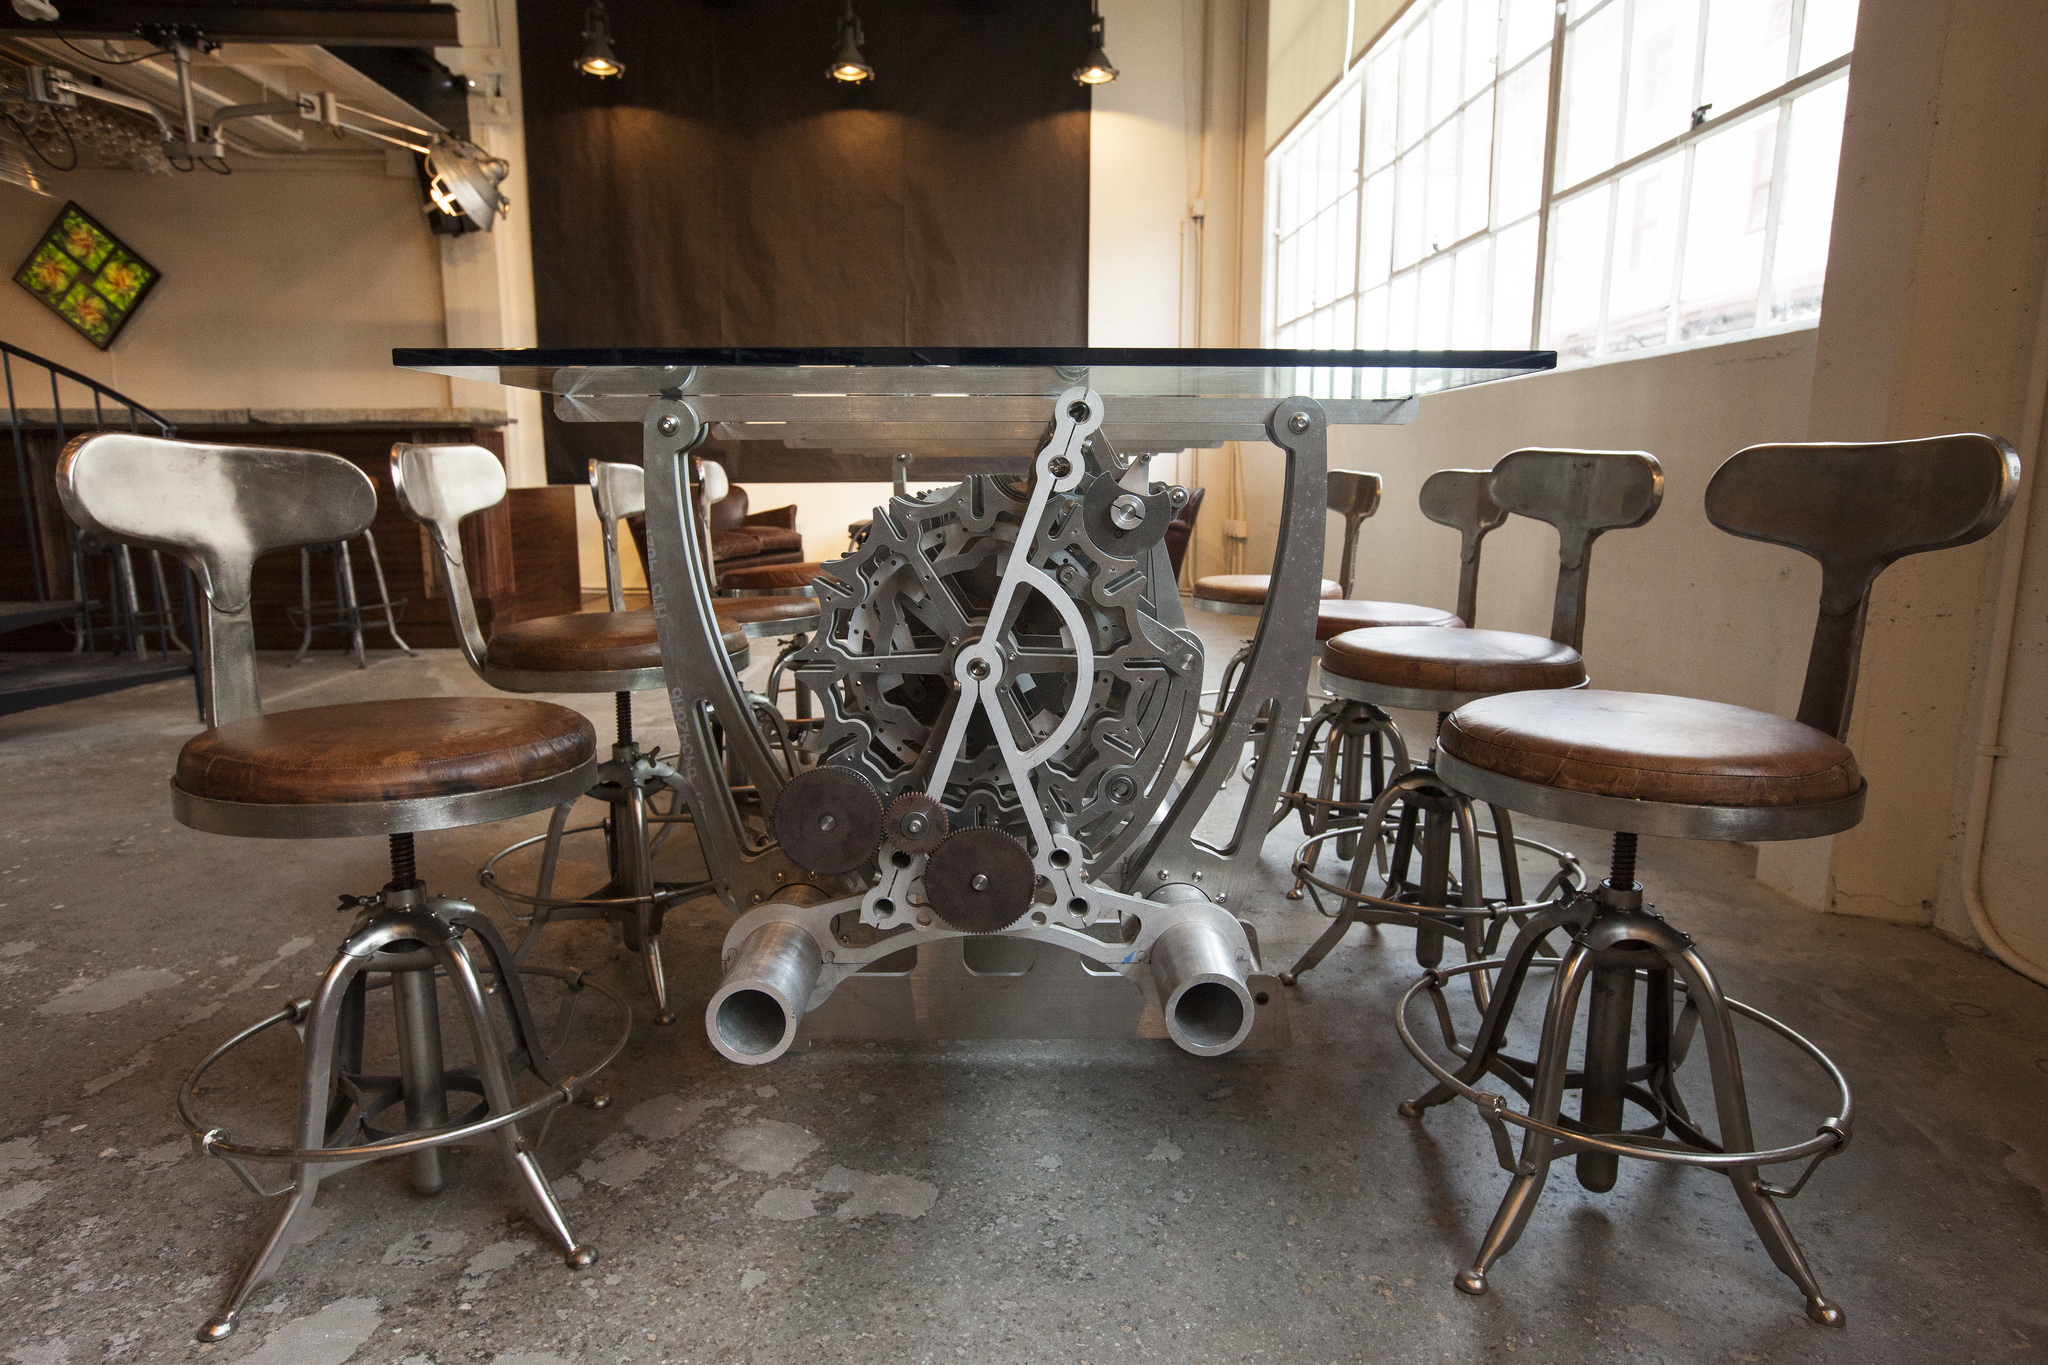  Originally the blacksmith and machine shop for Fort Mason, our design brings a modern spirit to the 1930's era history of the space. Vintage stools and historic concrete floors speak to the original machine-shop space of the space. While a palette o